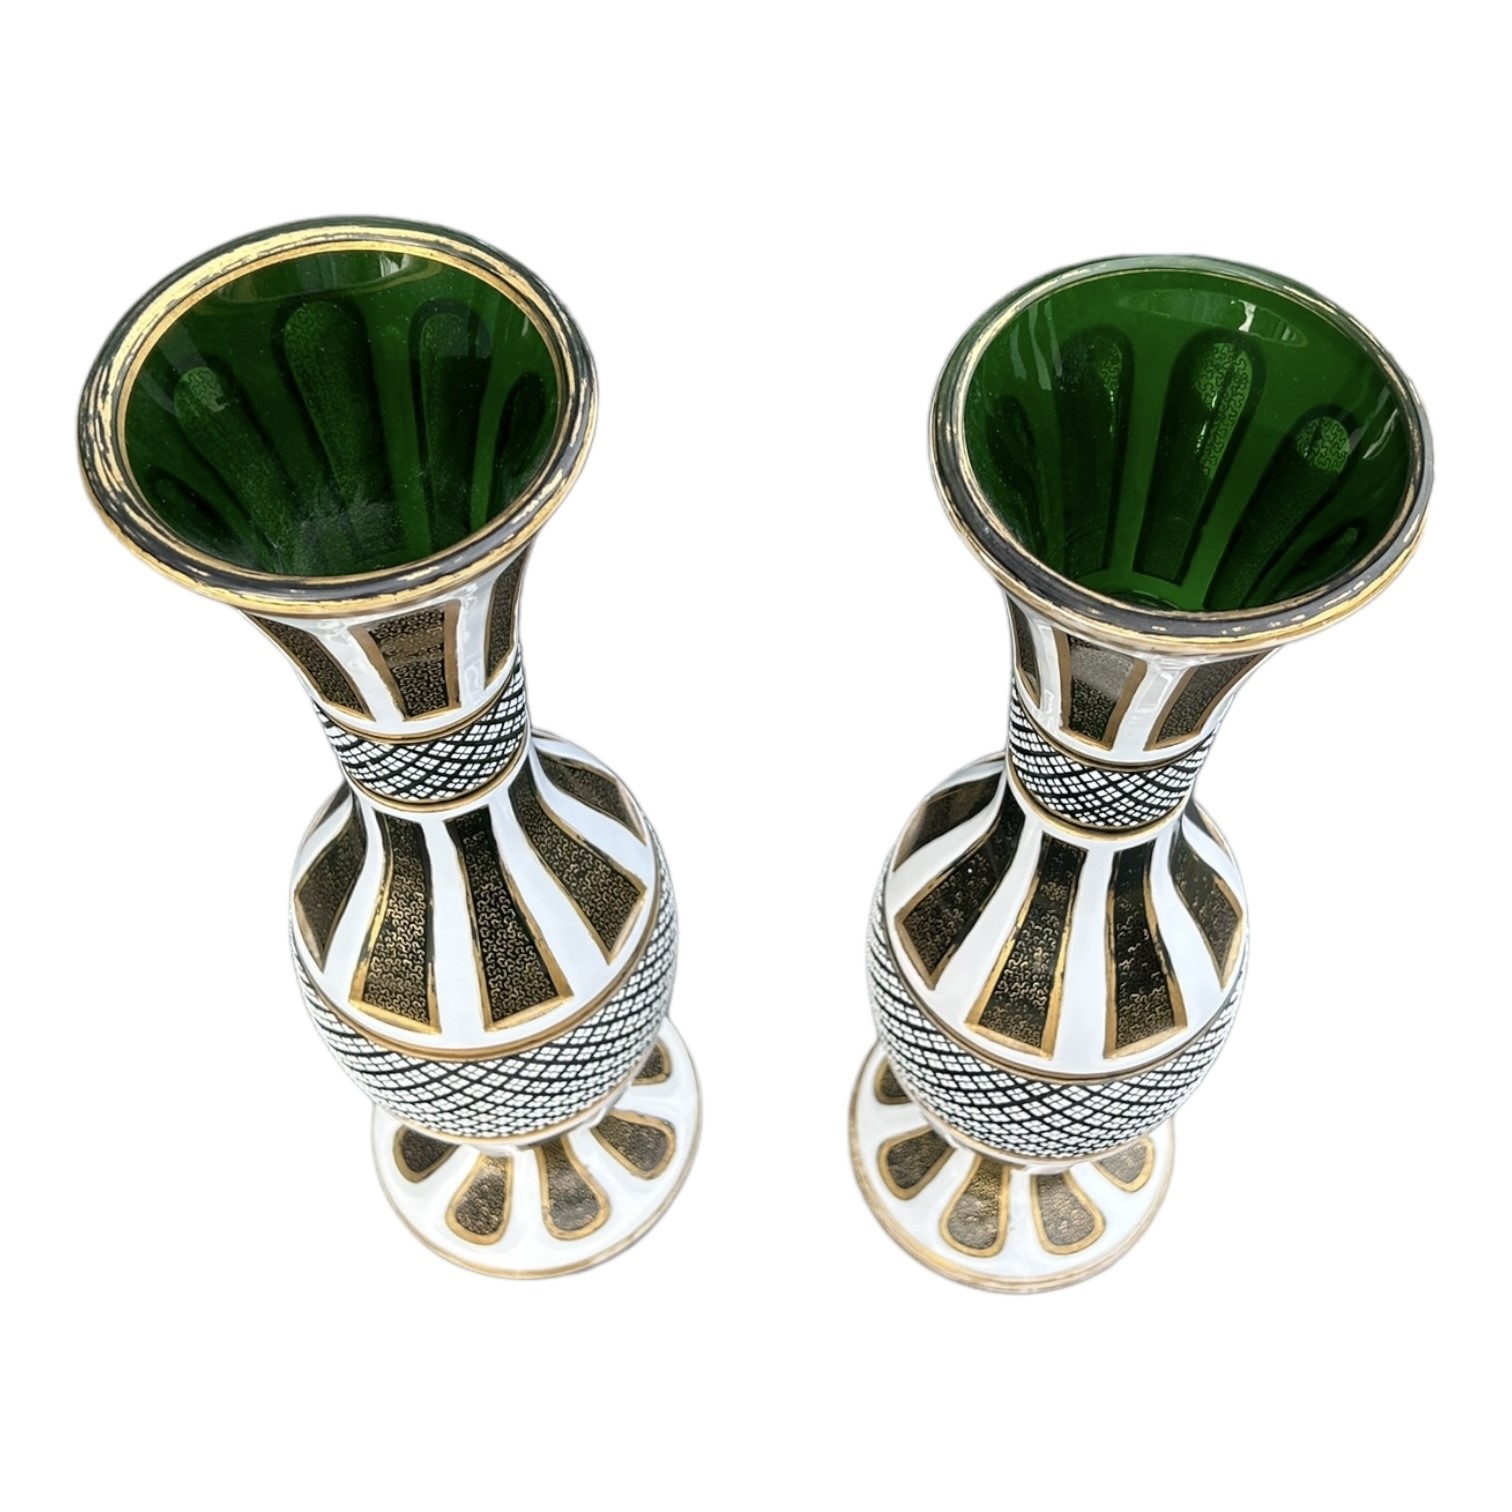 A PAIR OF LATE 19TH/EARLY 20TH CENTURY BOHEMIAN GLASS VASES Having green ground body with white - Image 2 of 3